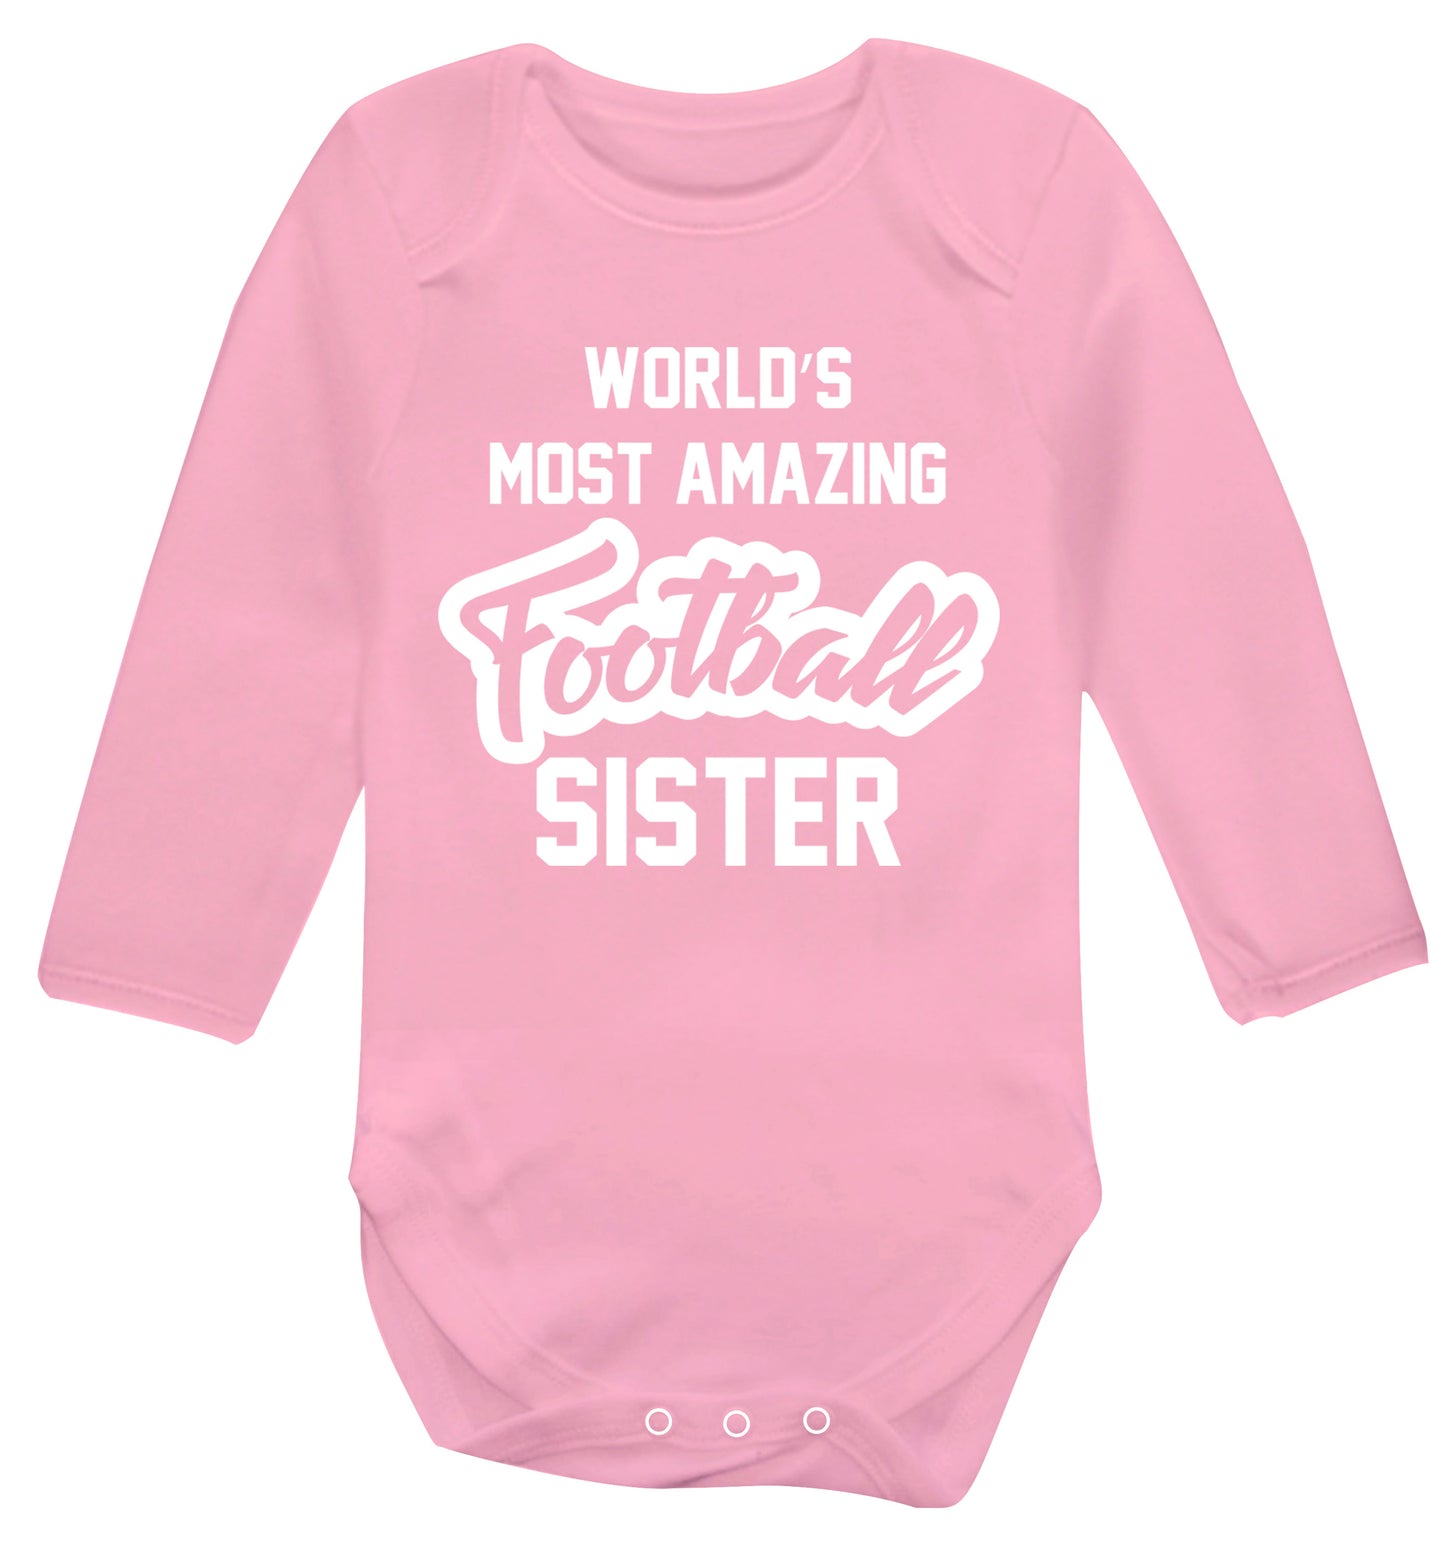 Worlds most amazing football sister Baby Vest long sleeved pale pink 6-12 months